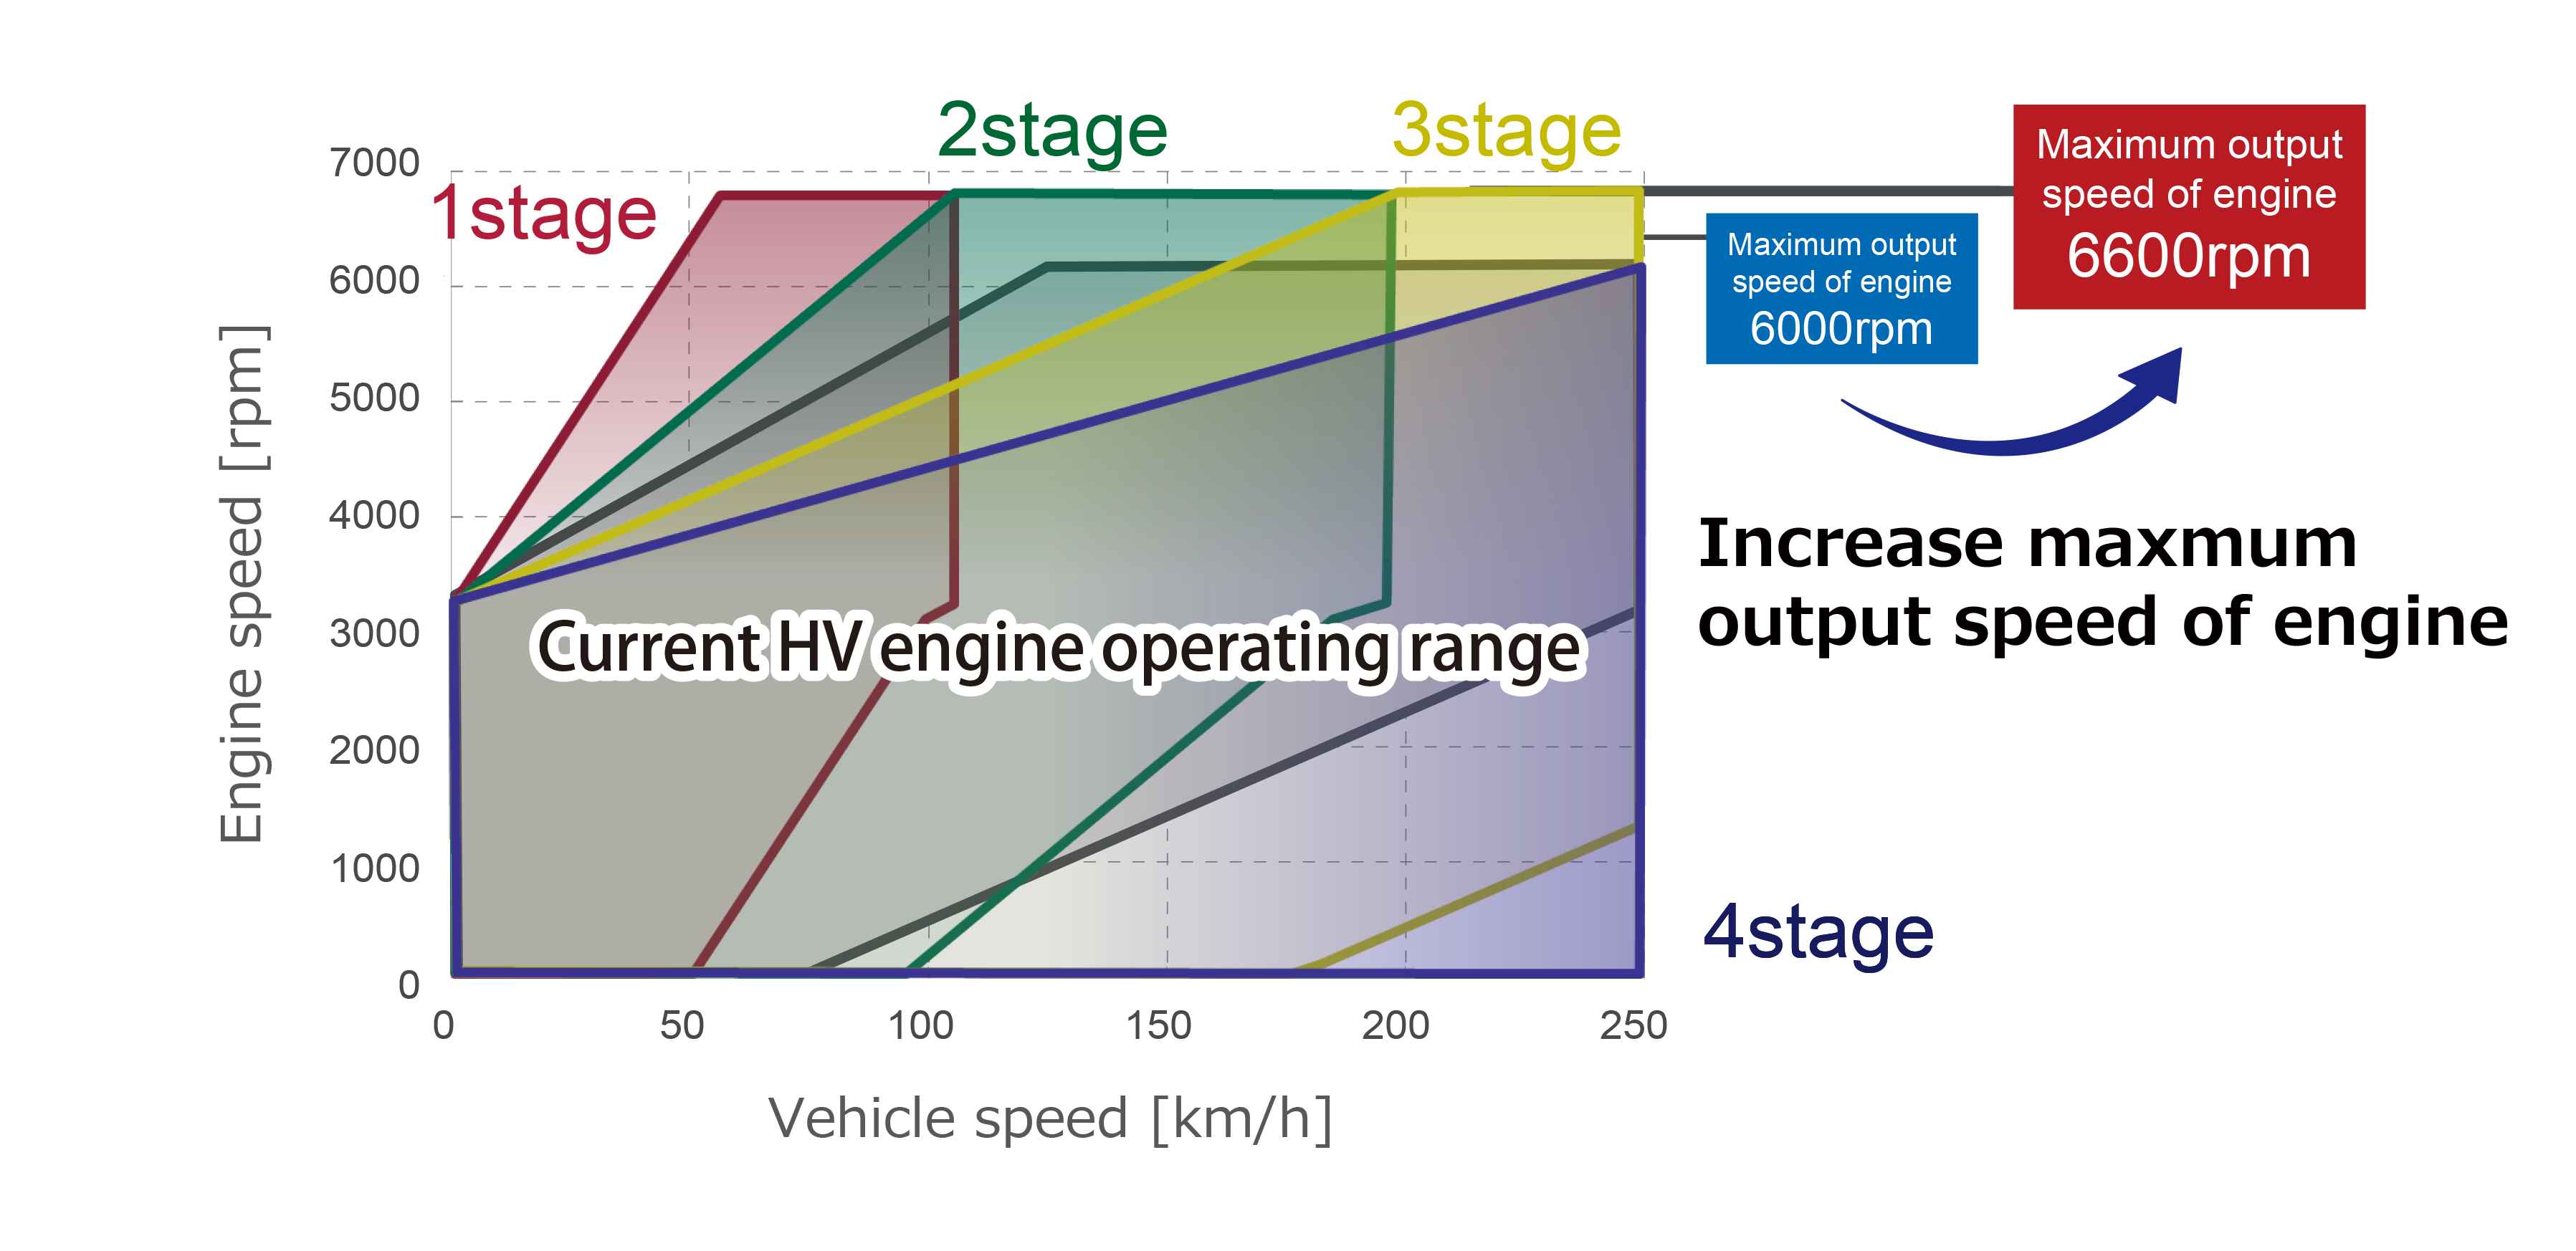 By adopting the Multi-Stage Shift Device to THS, the engine is able to operate in a wider speed range